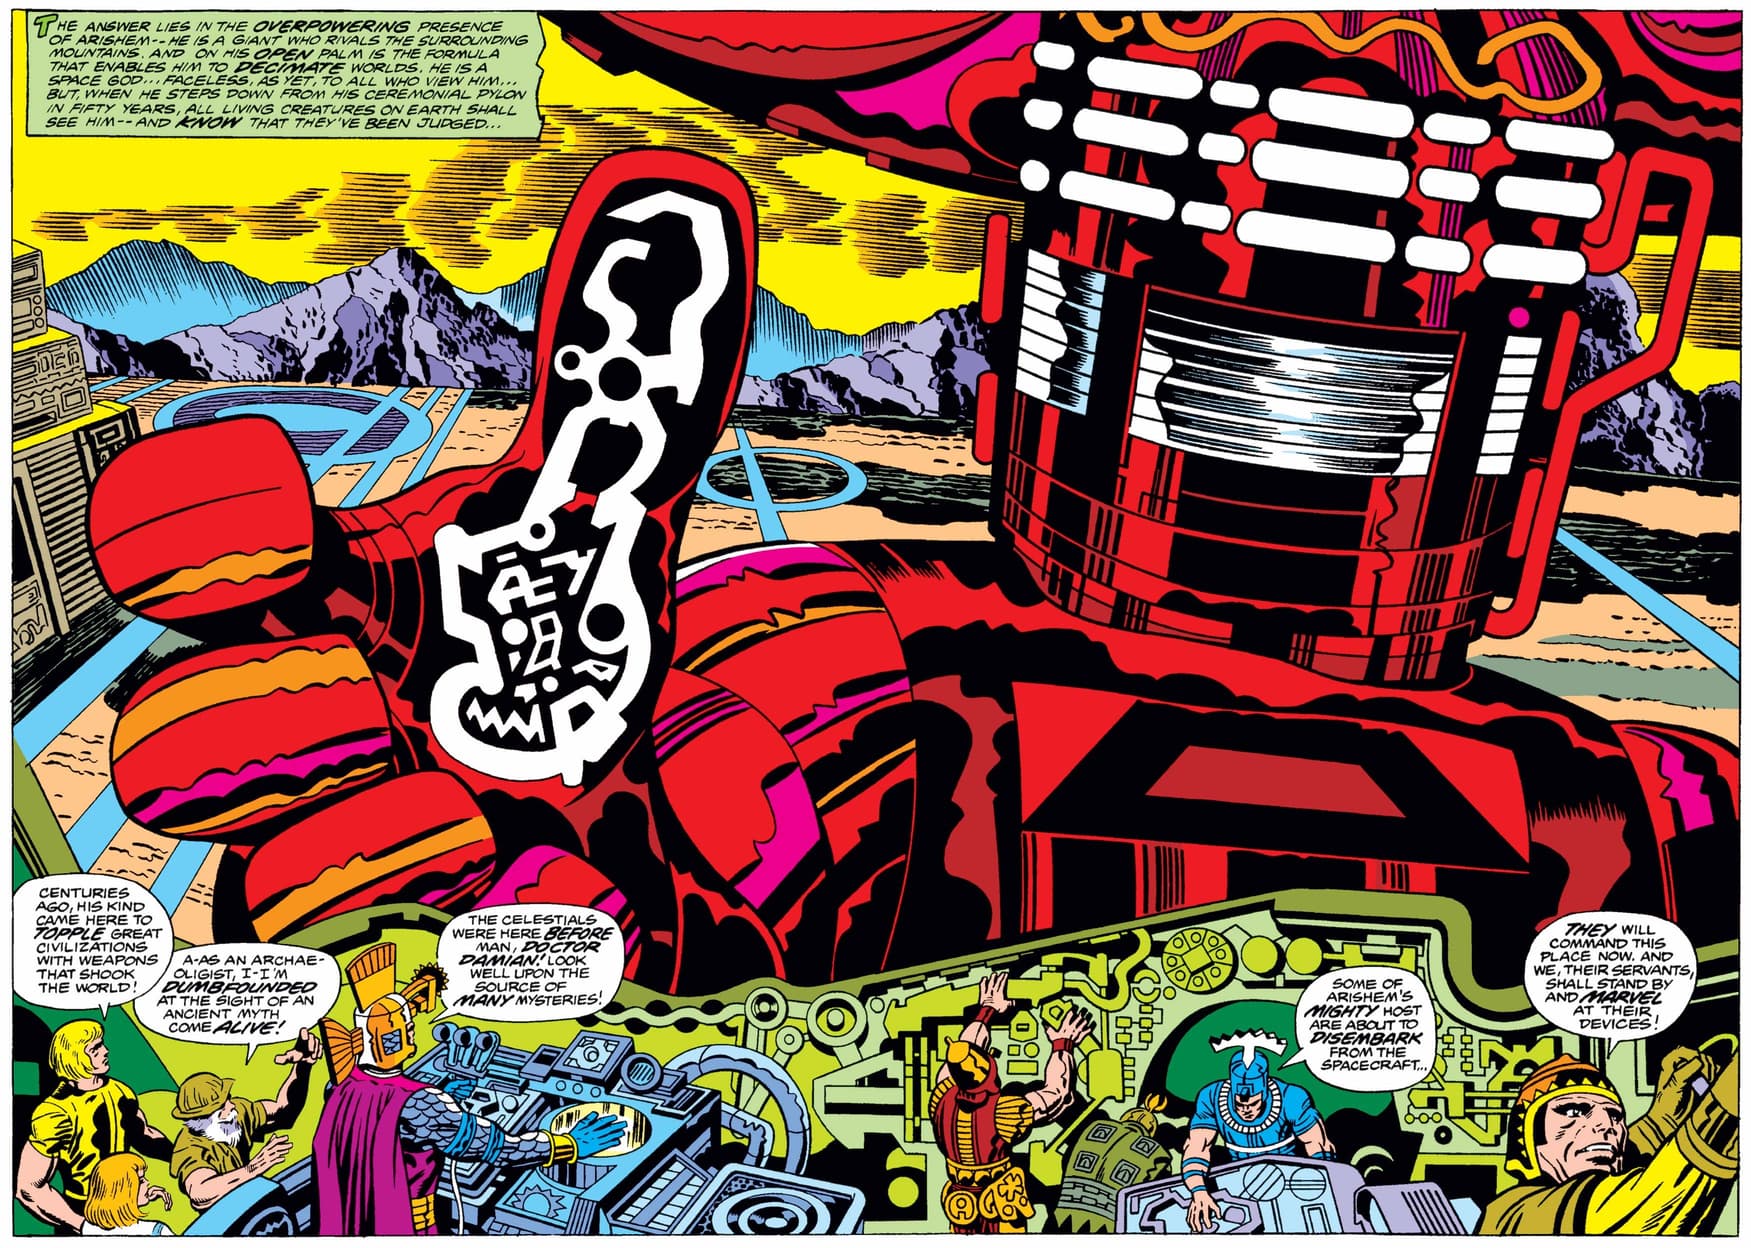 THE ETERNALS (1976) #3, PAGES 2-3